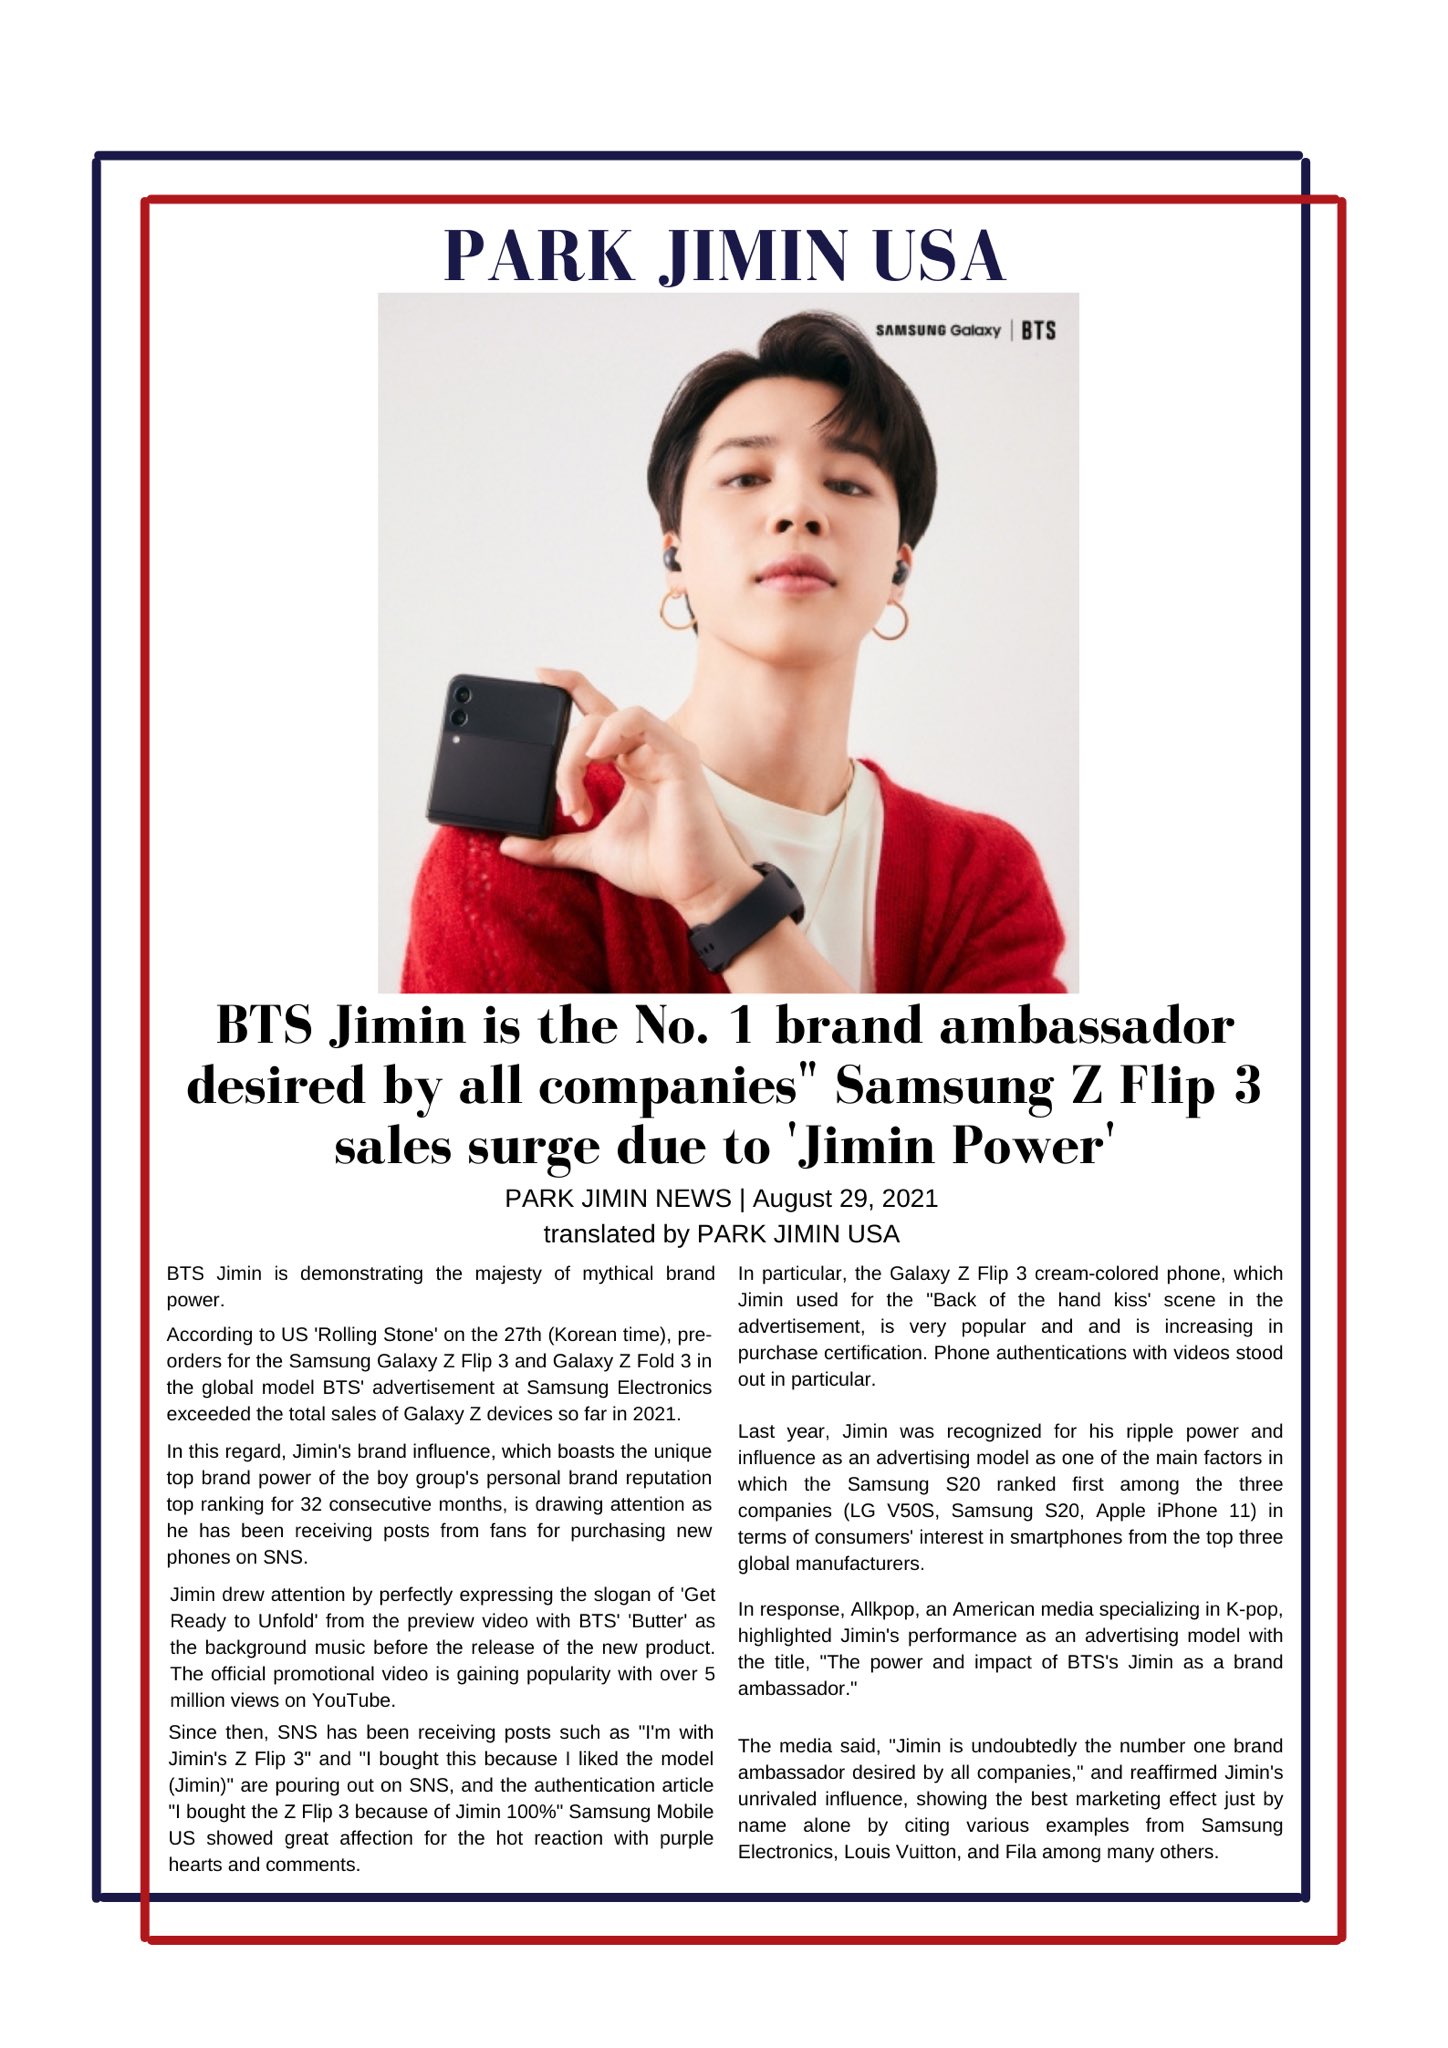 X \ Park Jimin USA 🇺🇸 على X: 'BRAND KING' BTS Jimin is demonstrating his  mythical brand power as he causes a sales surge in @SamsungMobile  #GalaxyZFlip3 with SNS posts proving sales